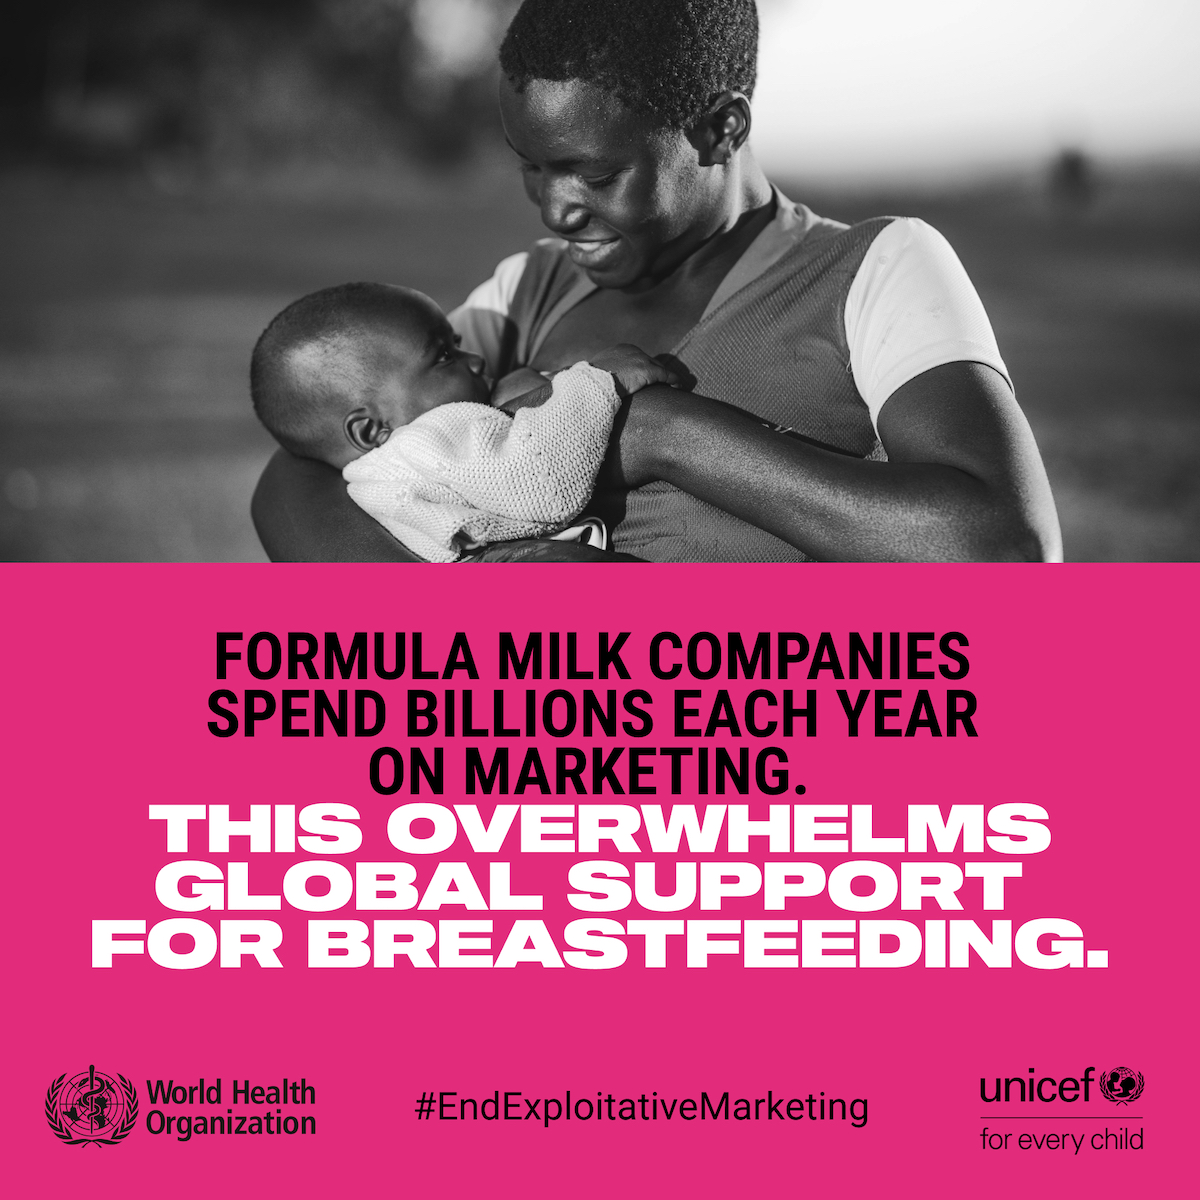 WHO/Unicef advertisement reading ‘Formula milk companies spend billions each year on marketing. This owverwhelms global support for breastfeeding’.